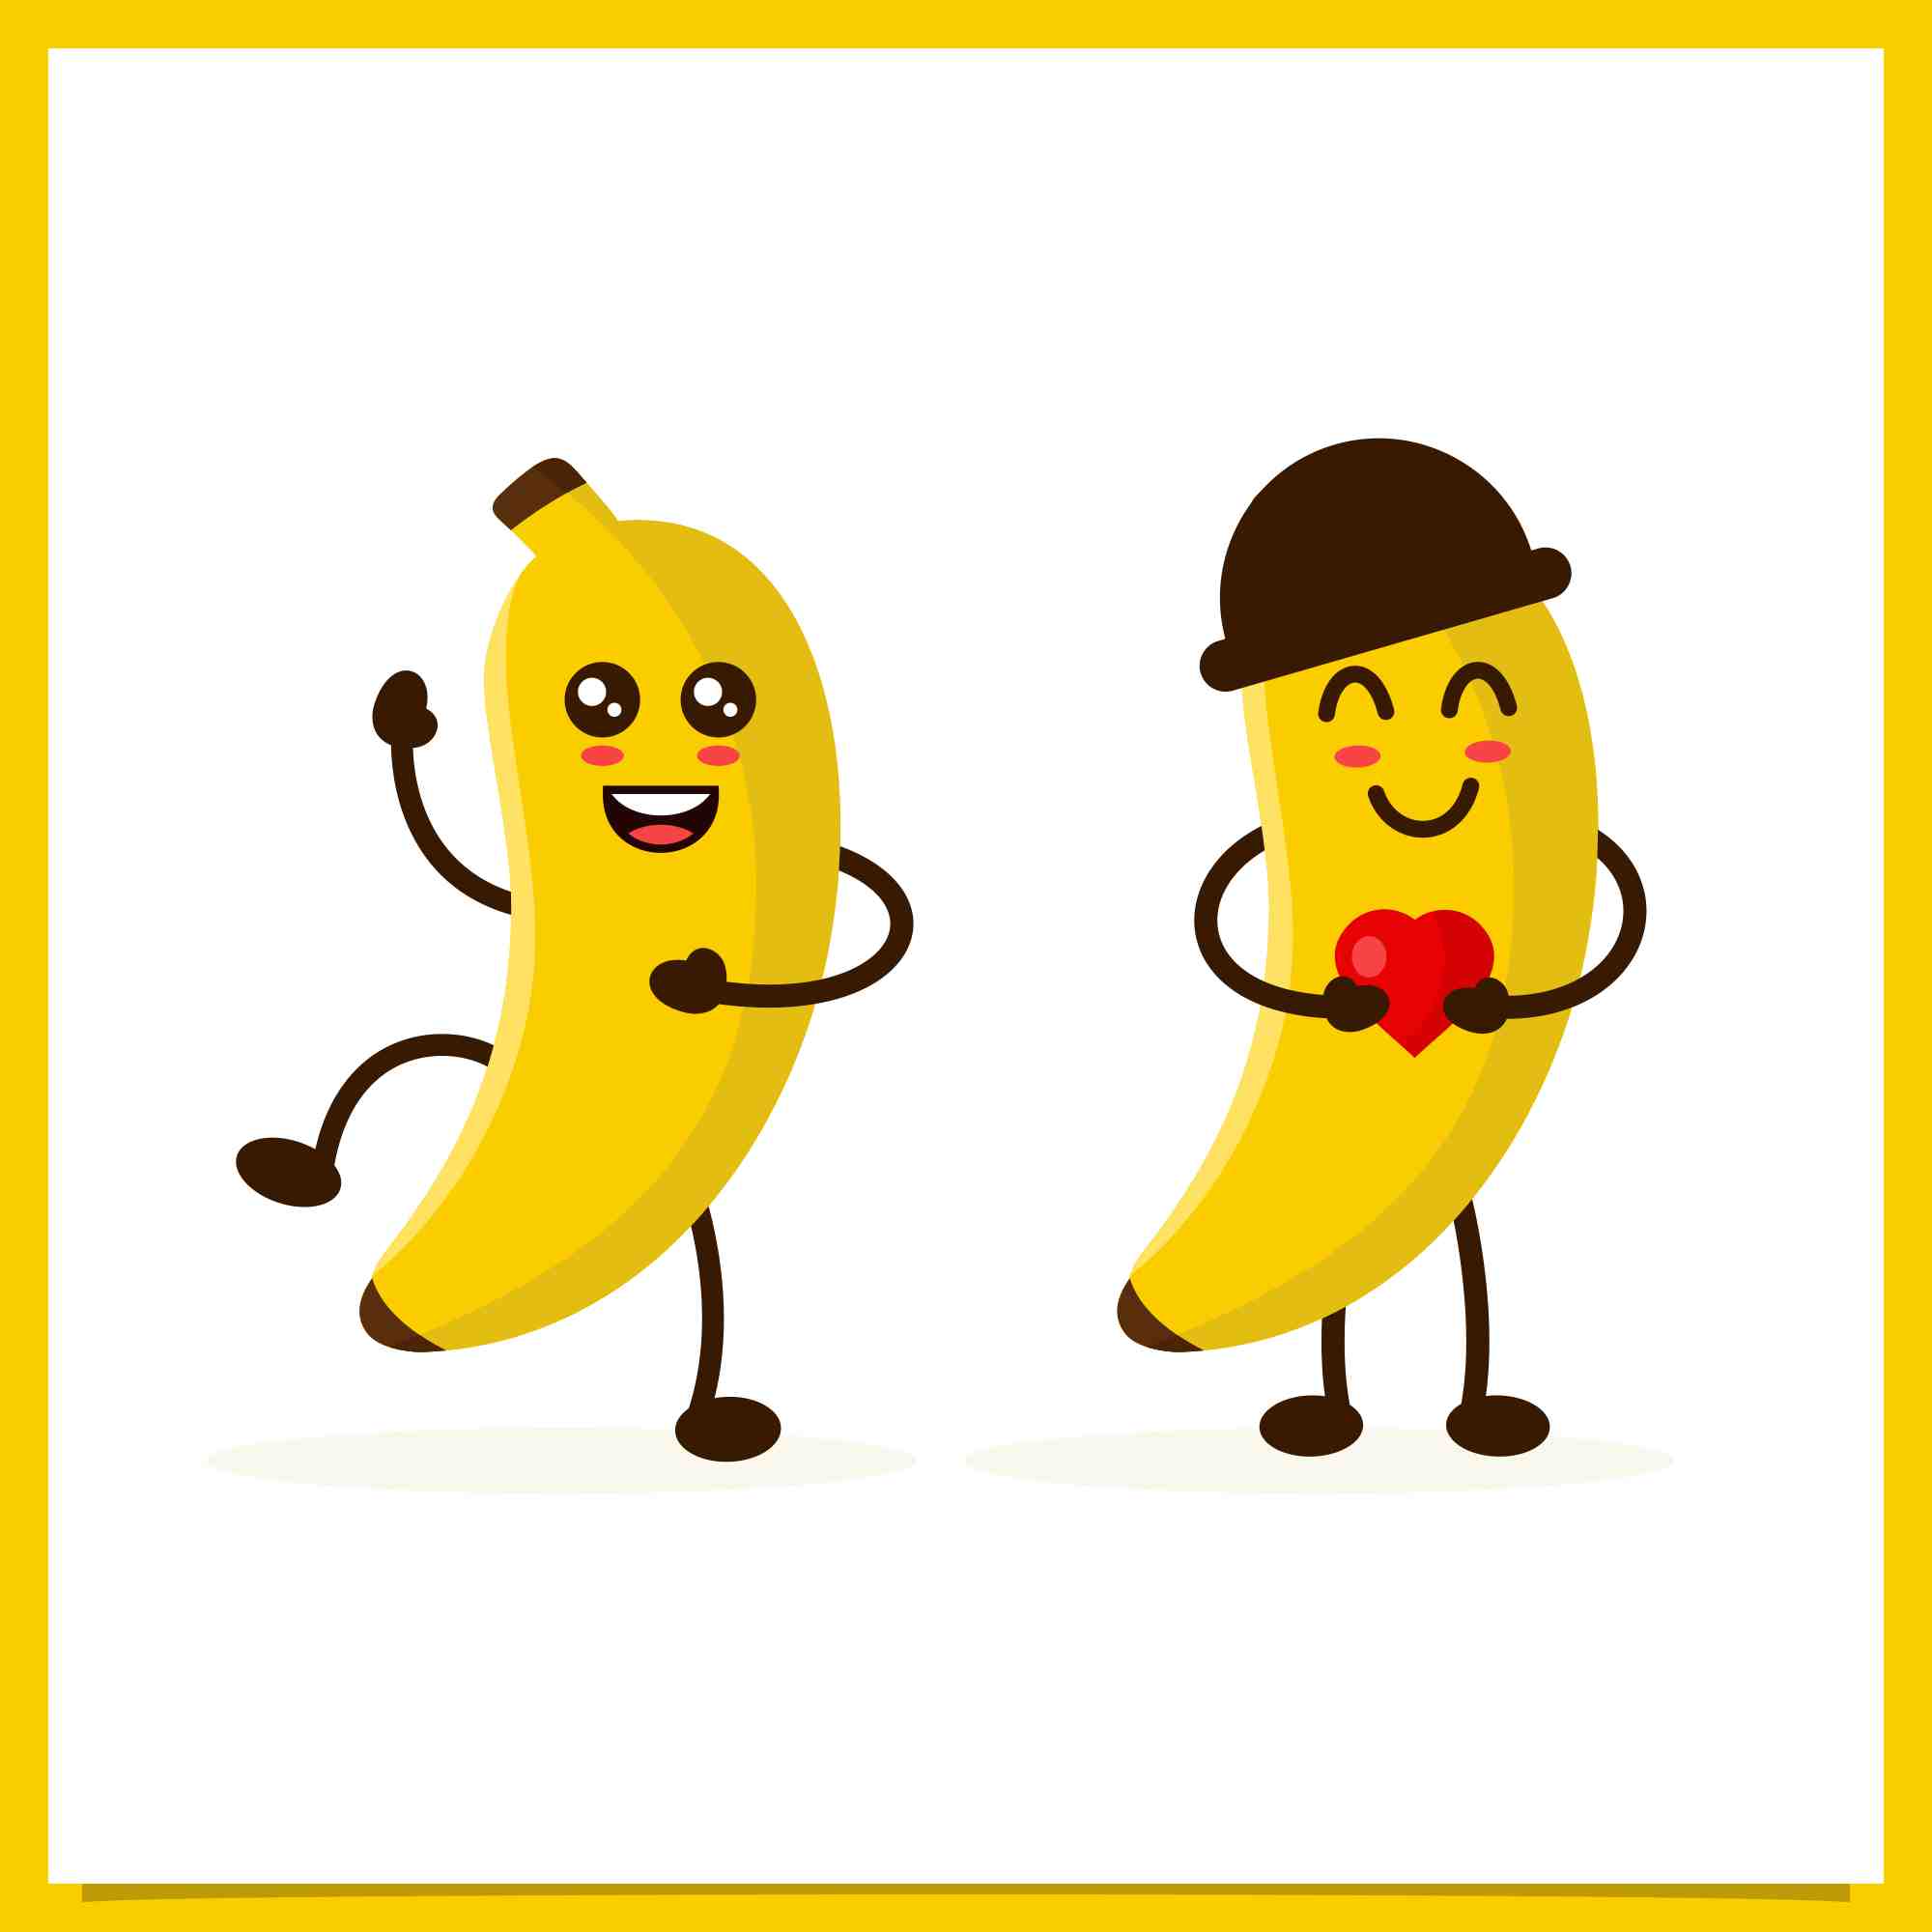 Set Cute Banana character design collection - $4 preview image.